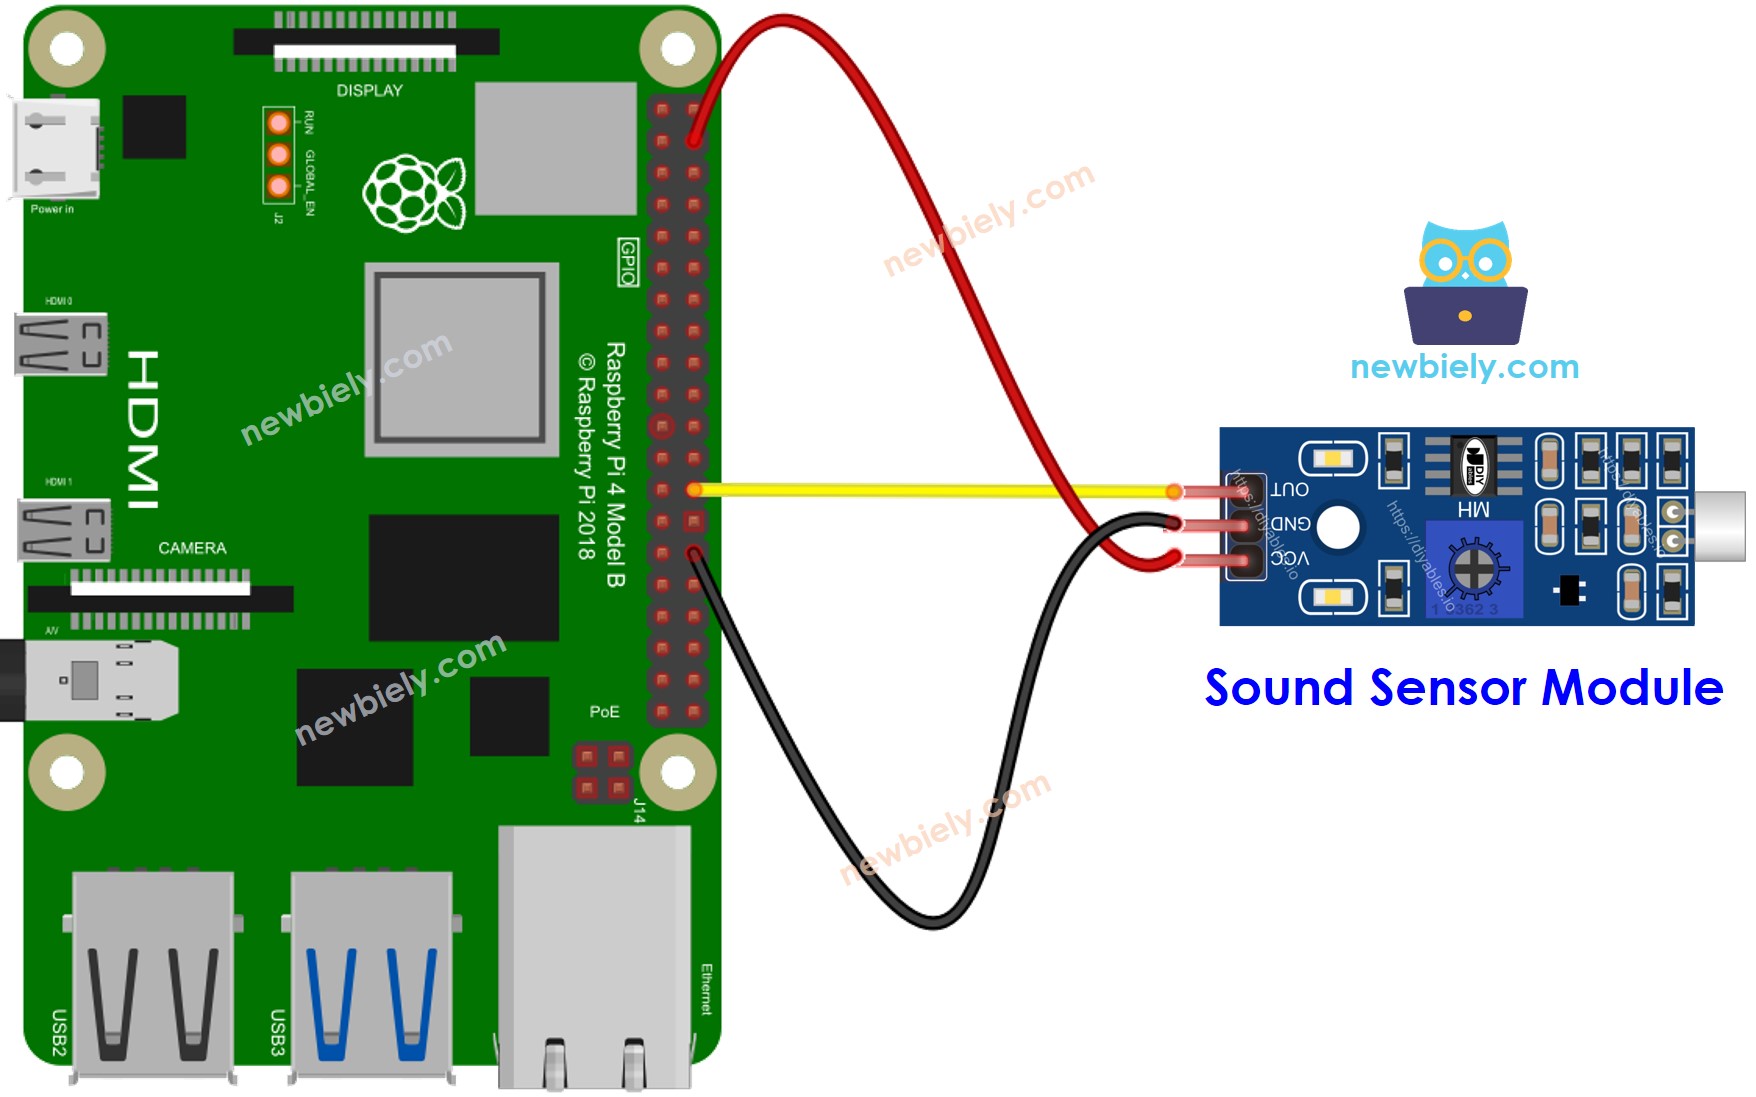 The wiring diagram between Raspberry Pi and Sound Sensor